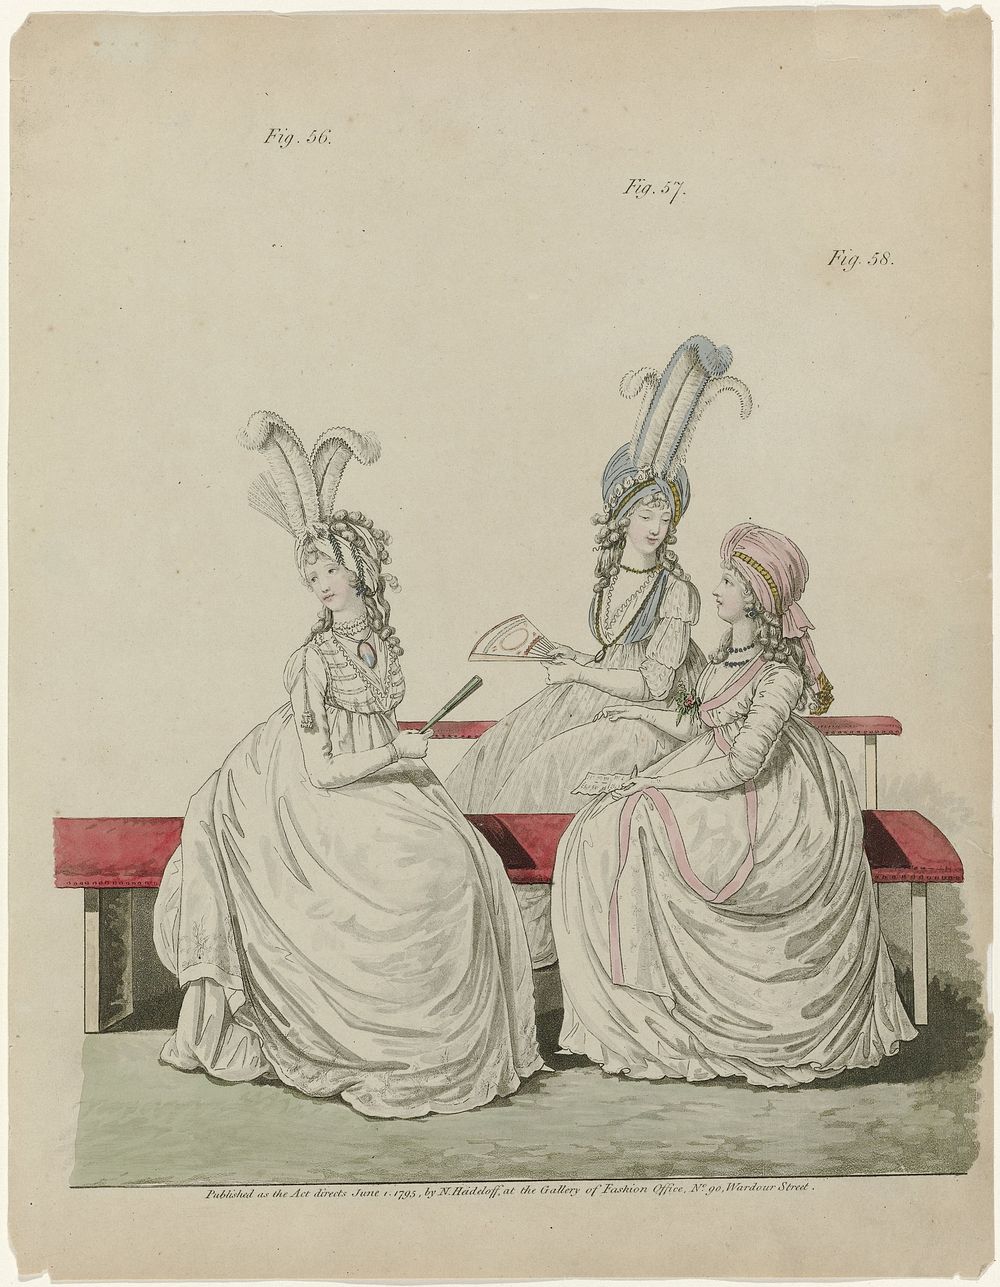 The Gallery of Fashion (1795) by anonymous and Nicolaus Heideloff